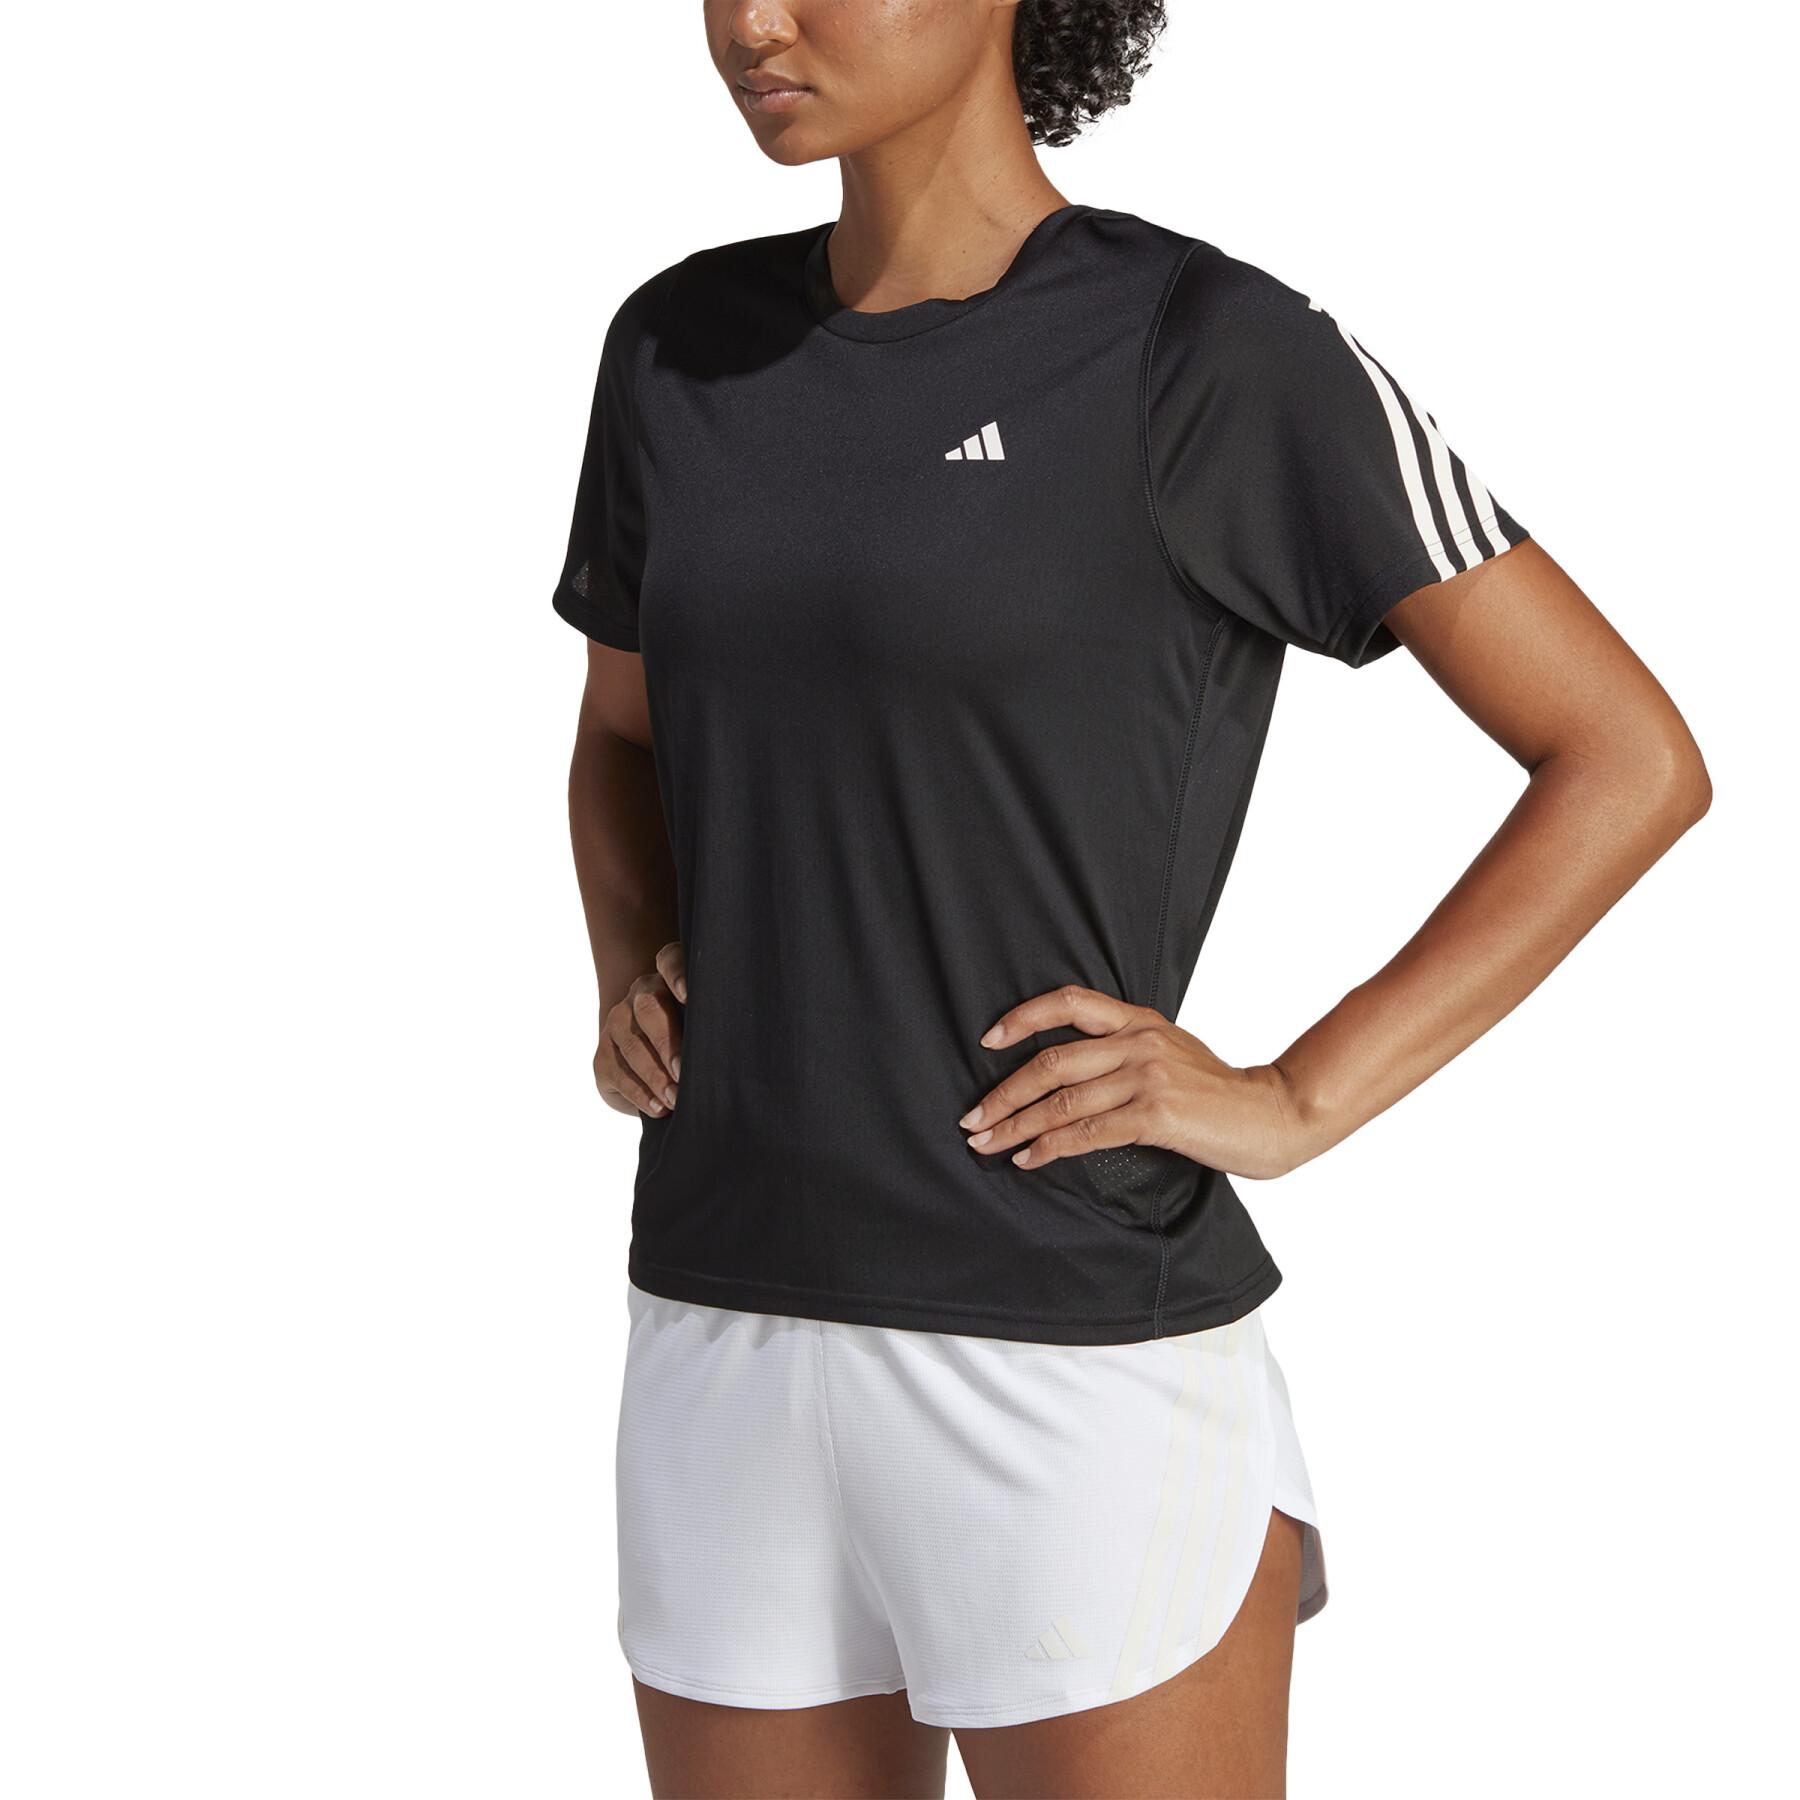 Maillot femme adidas 3-Stripes Run Icons Low Carbon